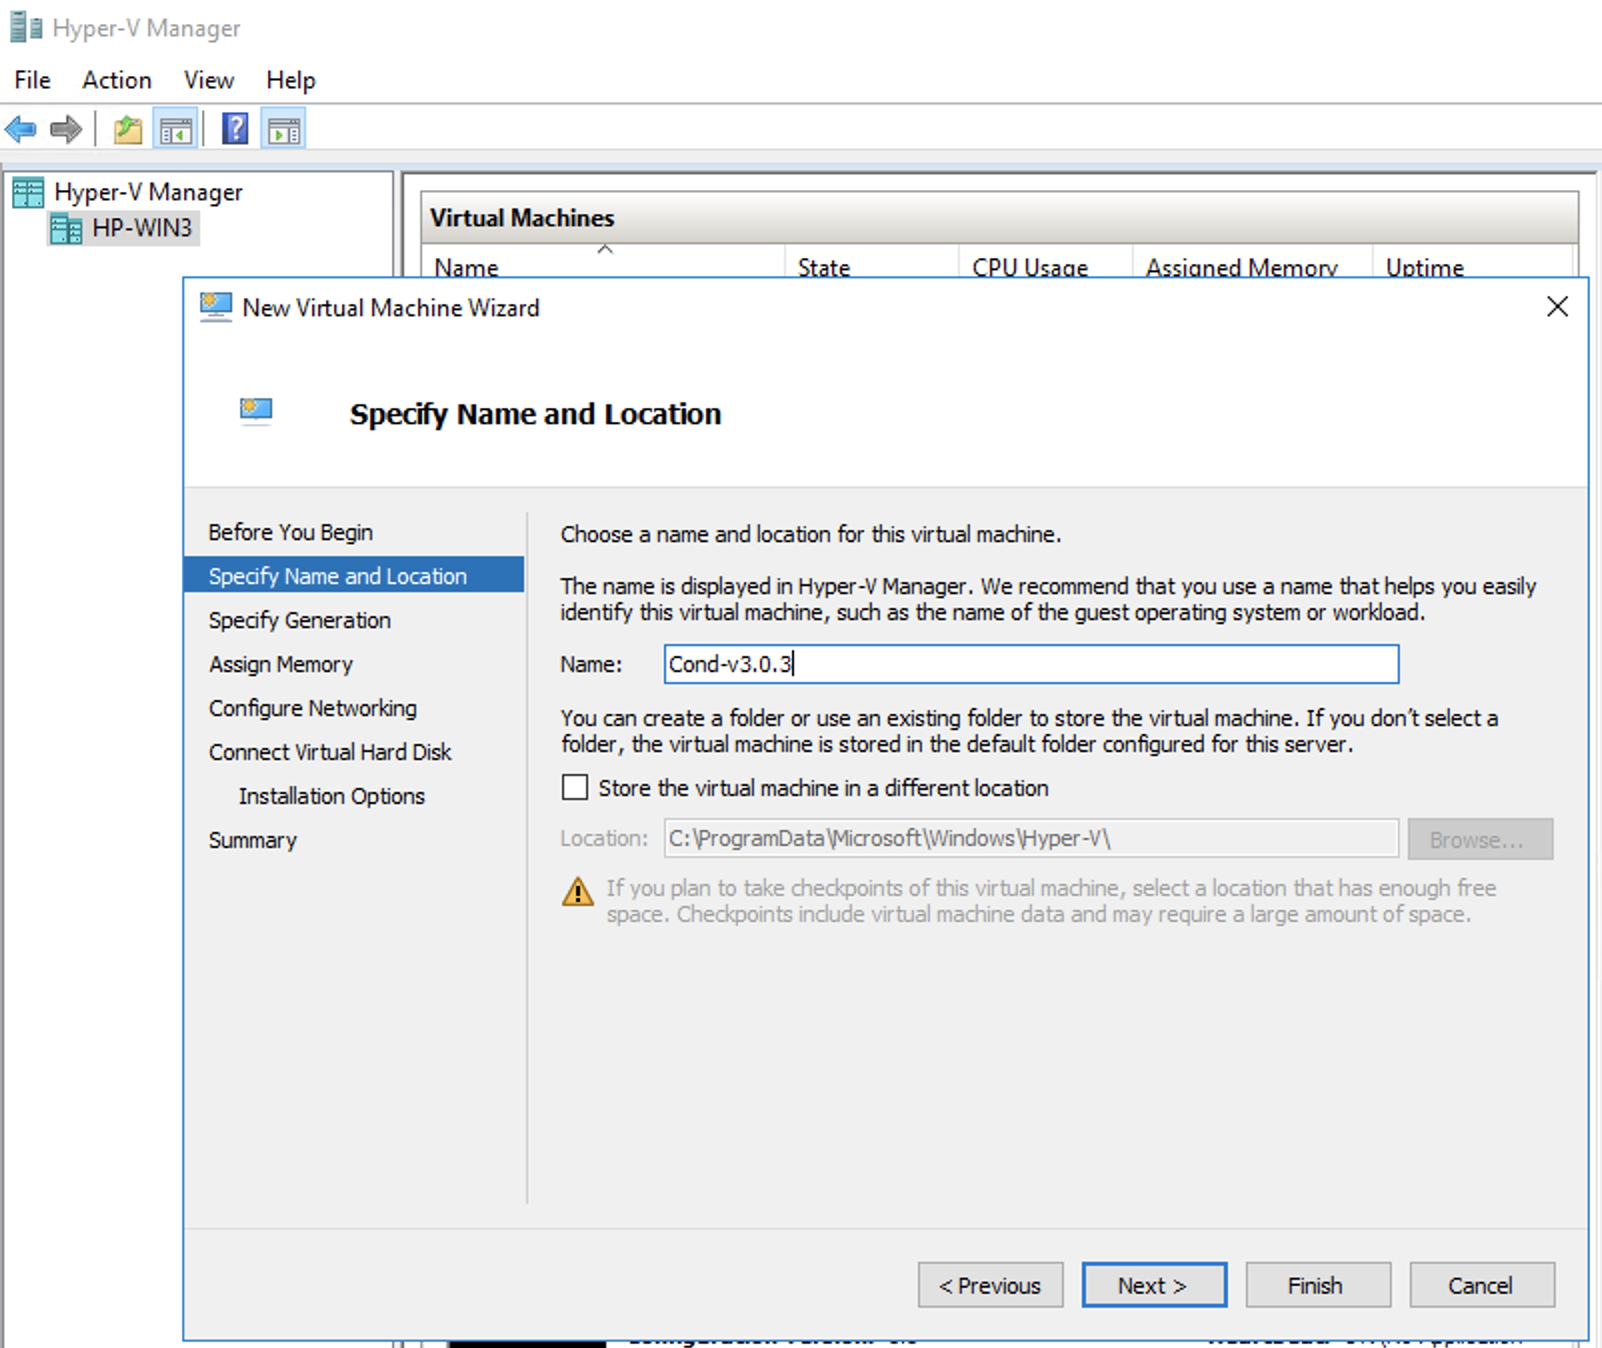 Hyper-V Manager Specify Name and Location of your new Virtual Machine